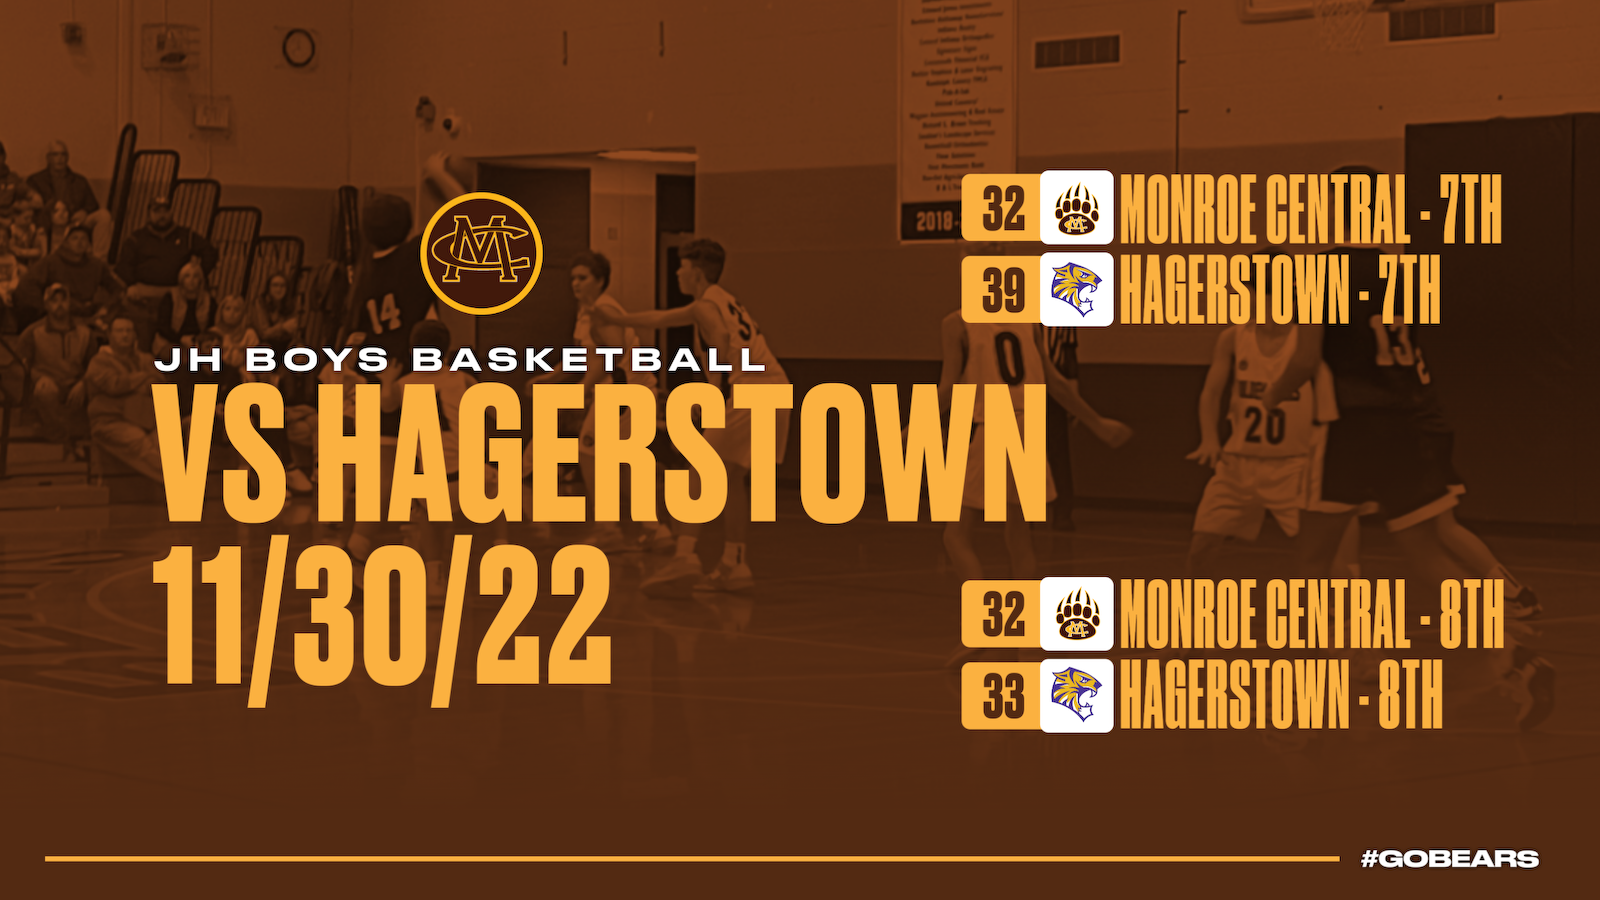 JH Boys Basketball falls to Hagerstown cover photo